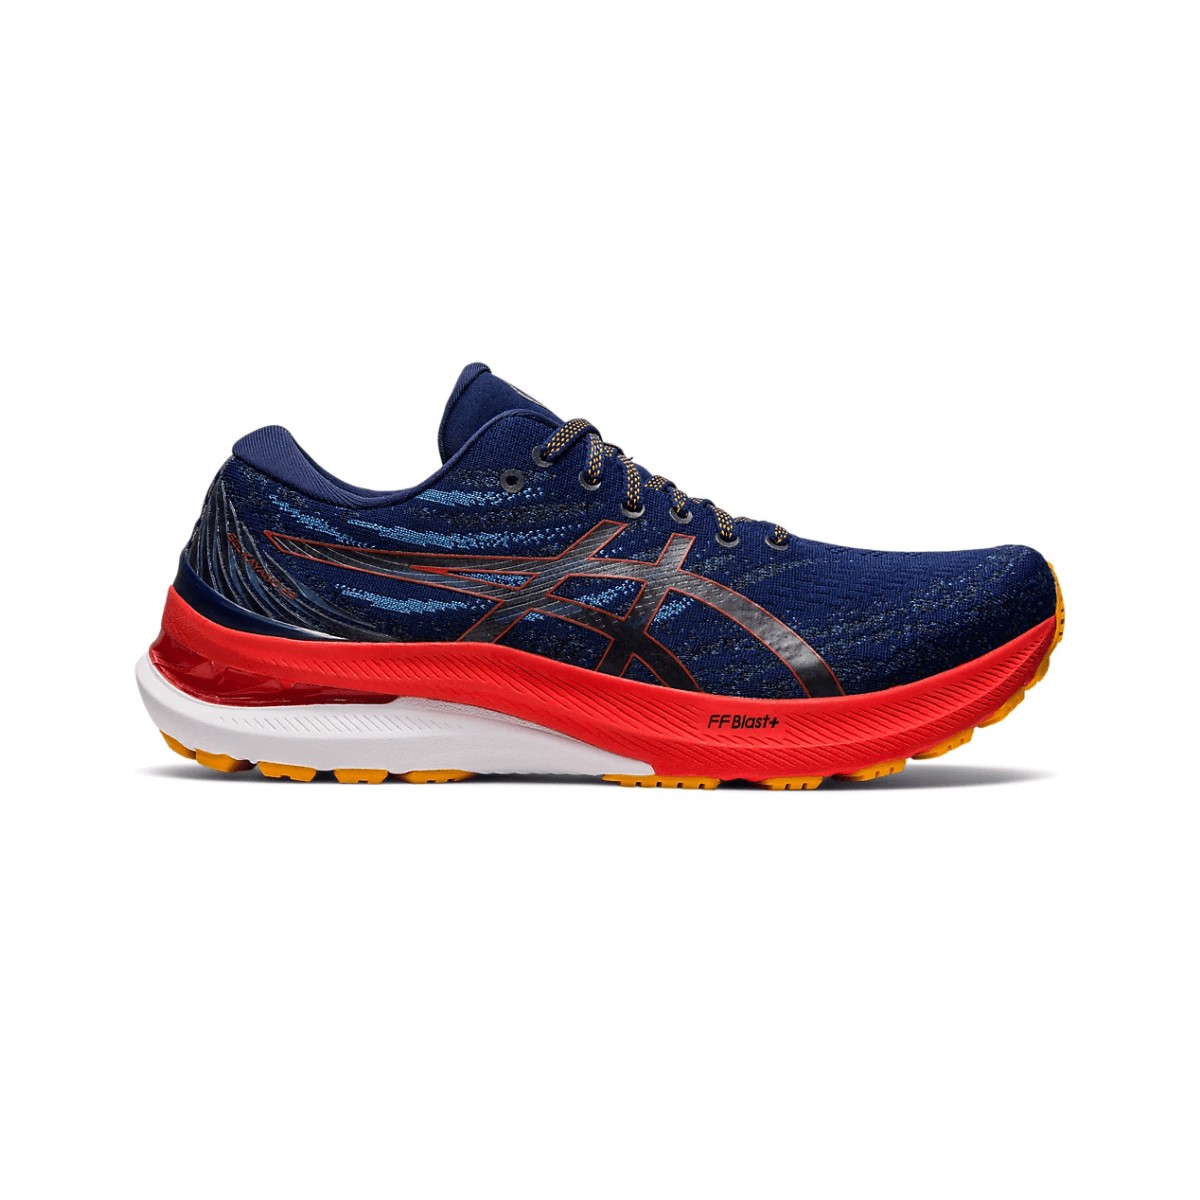 Asics Gel Kayano 29 Shoes Blue Red AW22, Size 41,5 - EUR